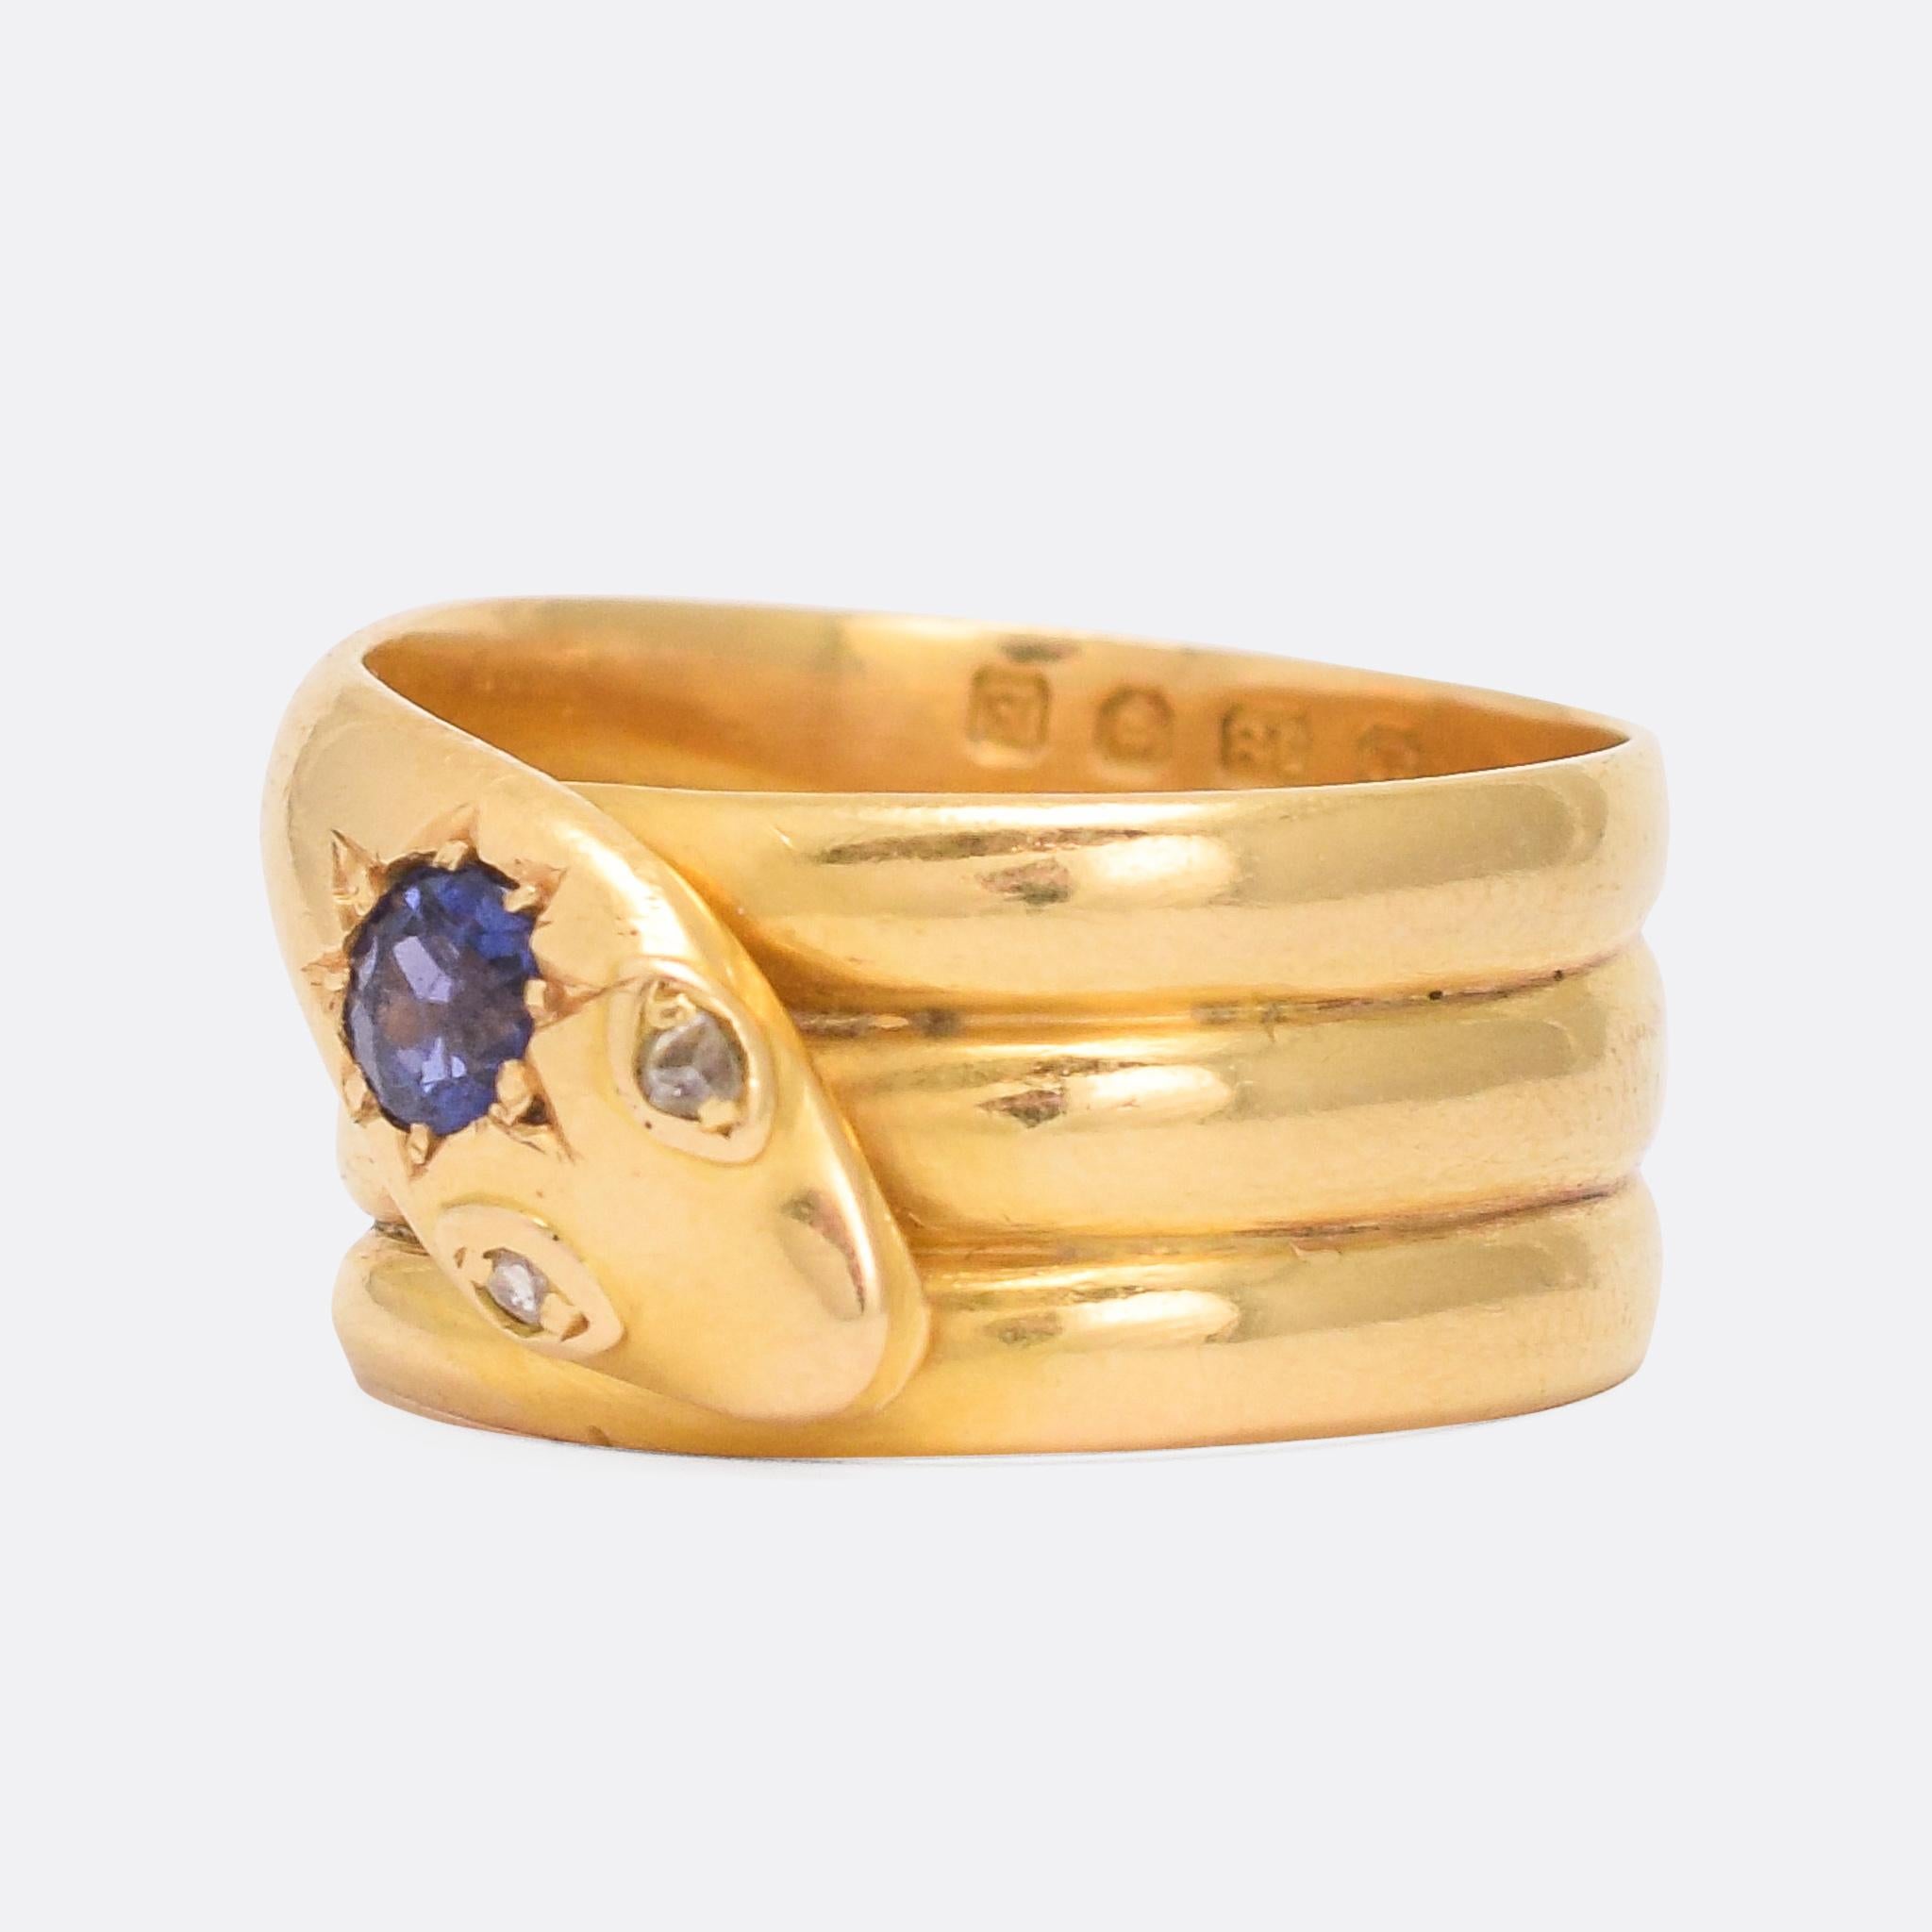 A superb Victorian coiled snake ring set with a vibrant natural sapphire on its head, and rose cut diamonds for eyes. It's finely worked, modelled in 18 karat gold with a friendly caricatured face. Clear London hallmarks date it to the year 1880. A